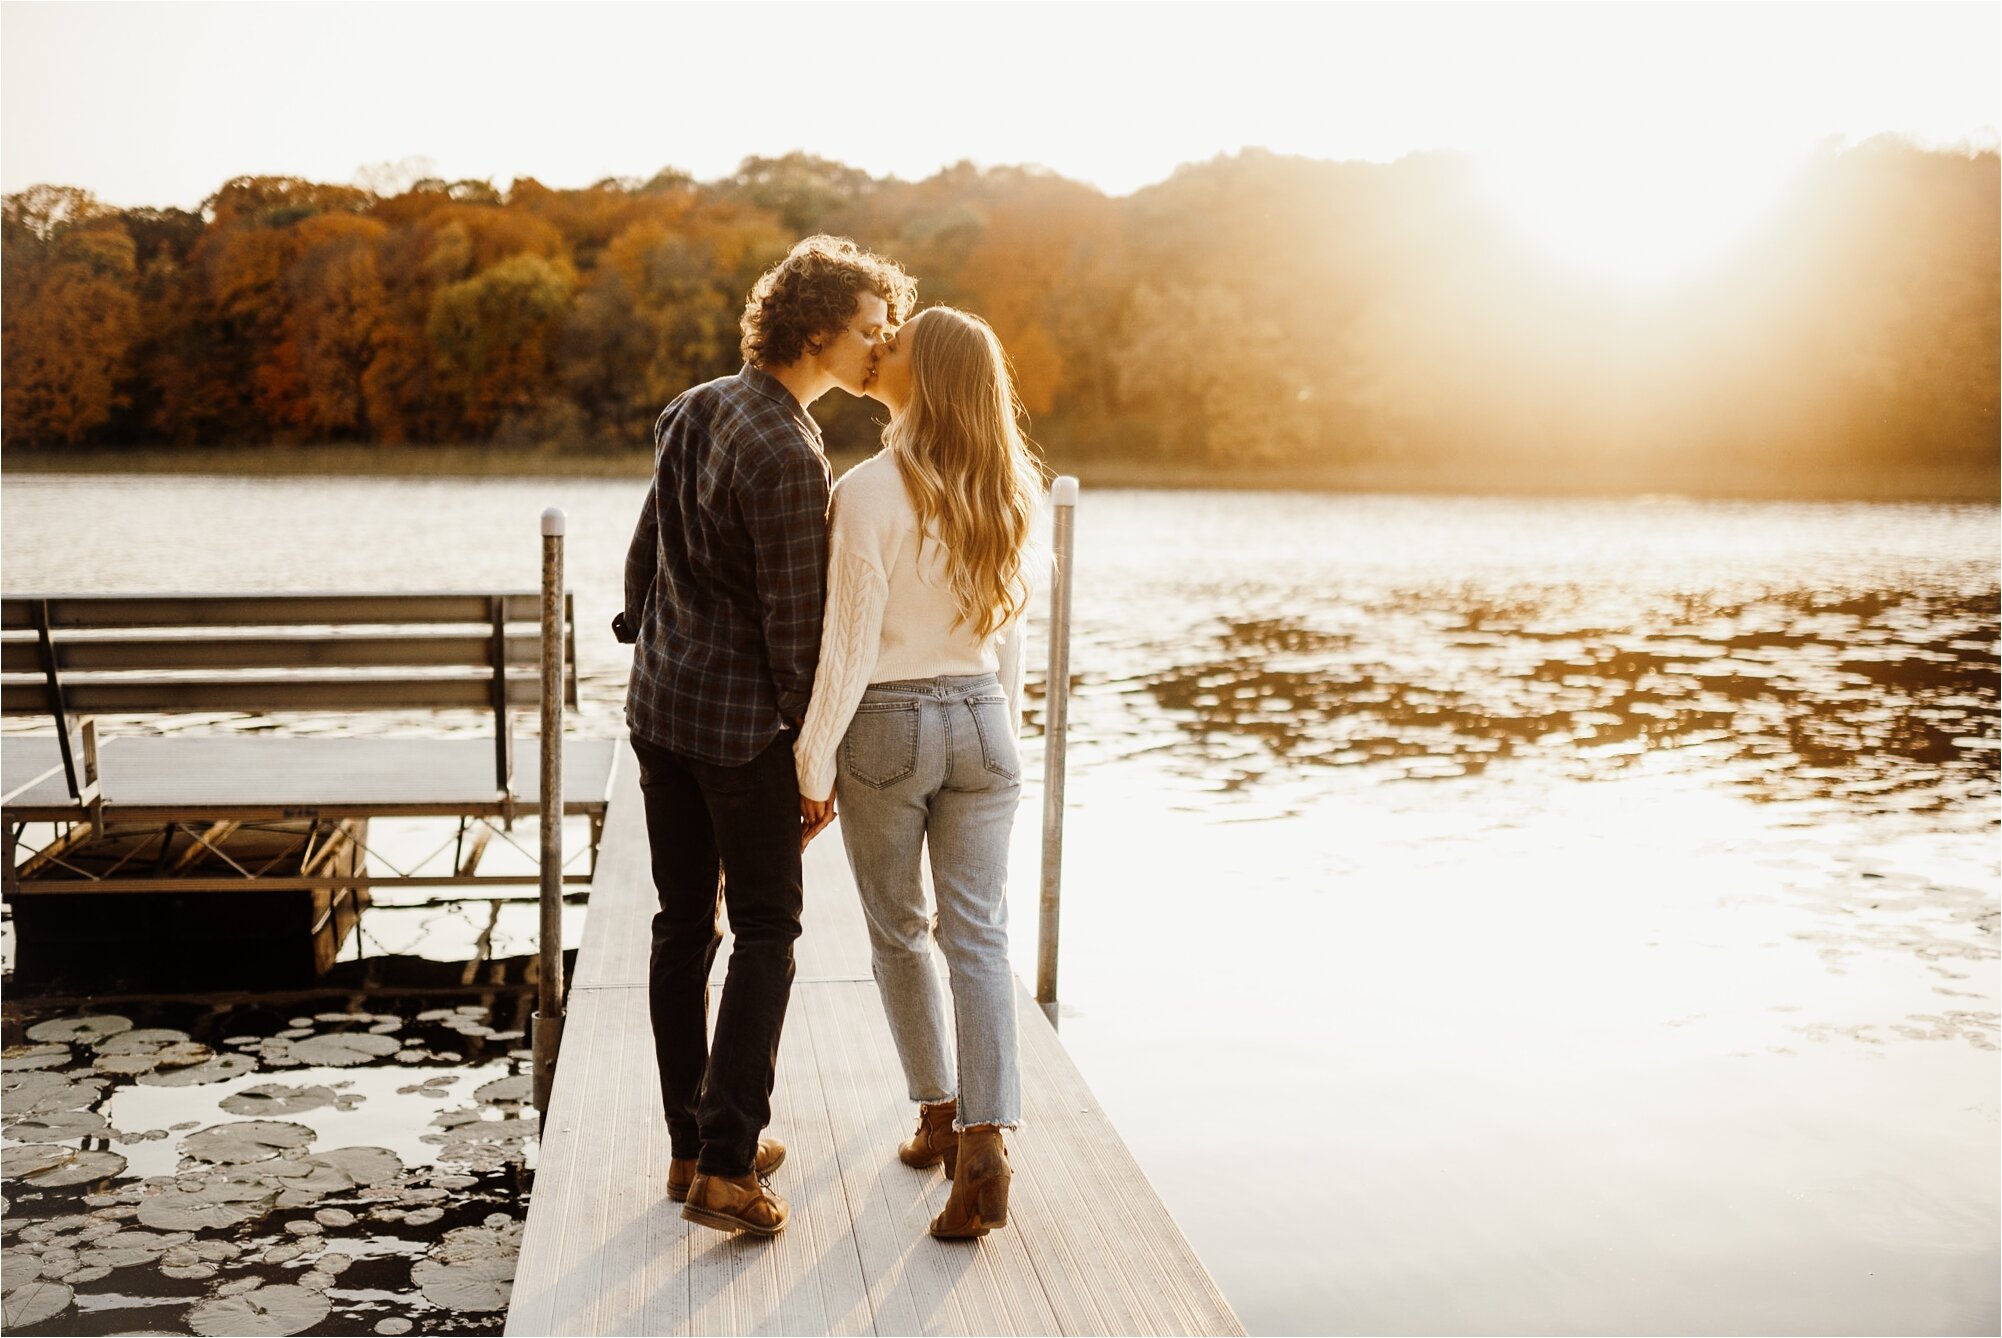  lake dock engagement session autumn fall october november september engaged photos pictures 